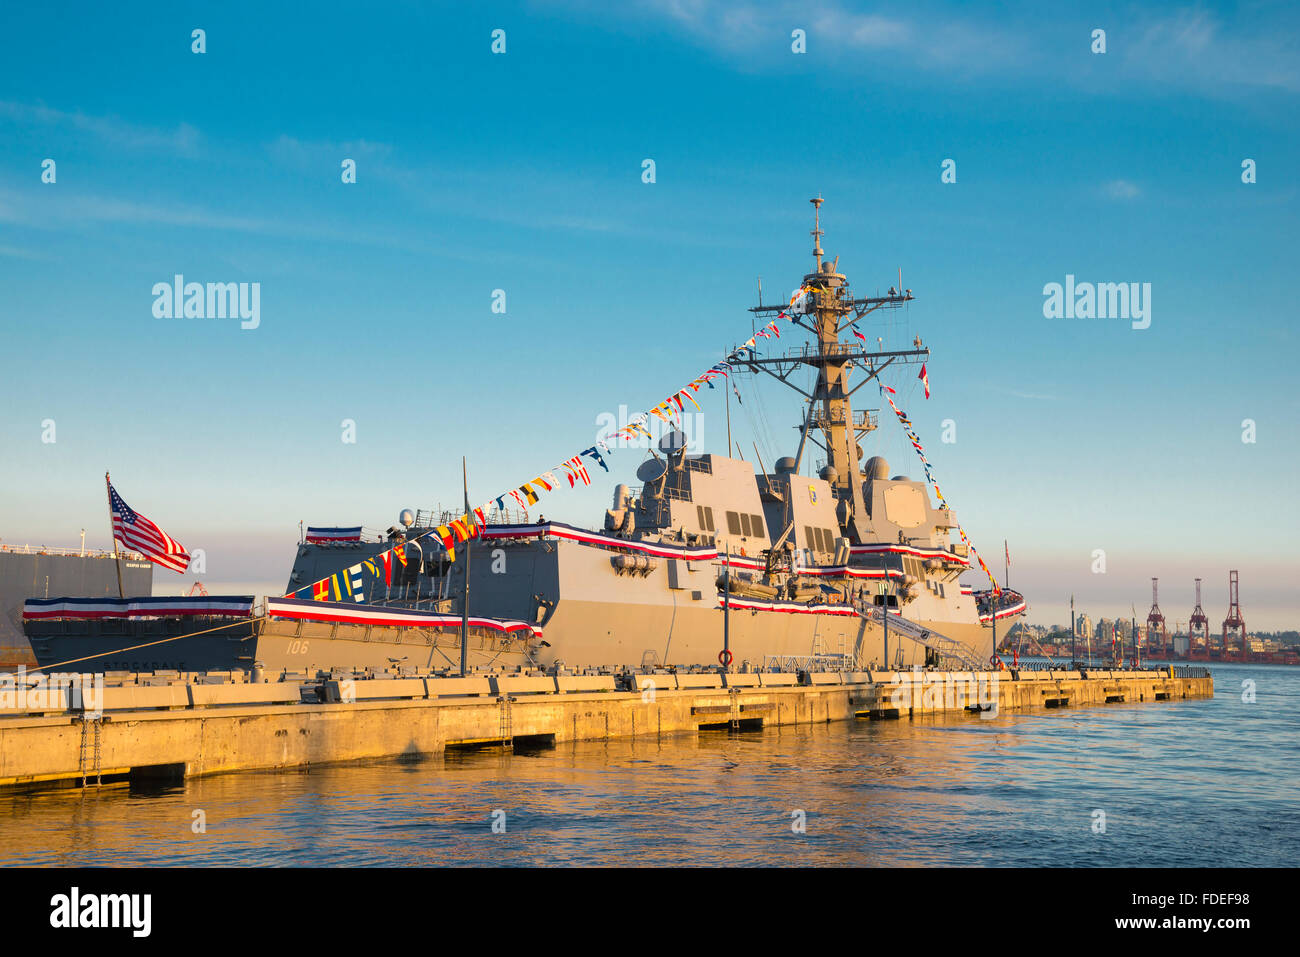 USS Stockdale (DDG-106) is an Arleigh Burke-class guided missile destroyer in the United States Navy. Docked here at N. Vancouve Stock Photo